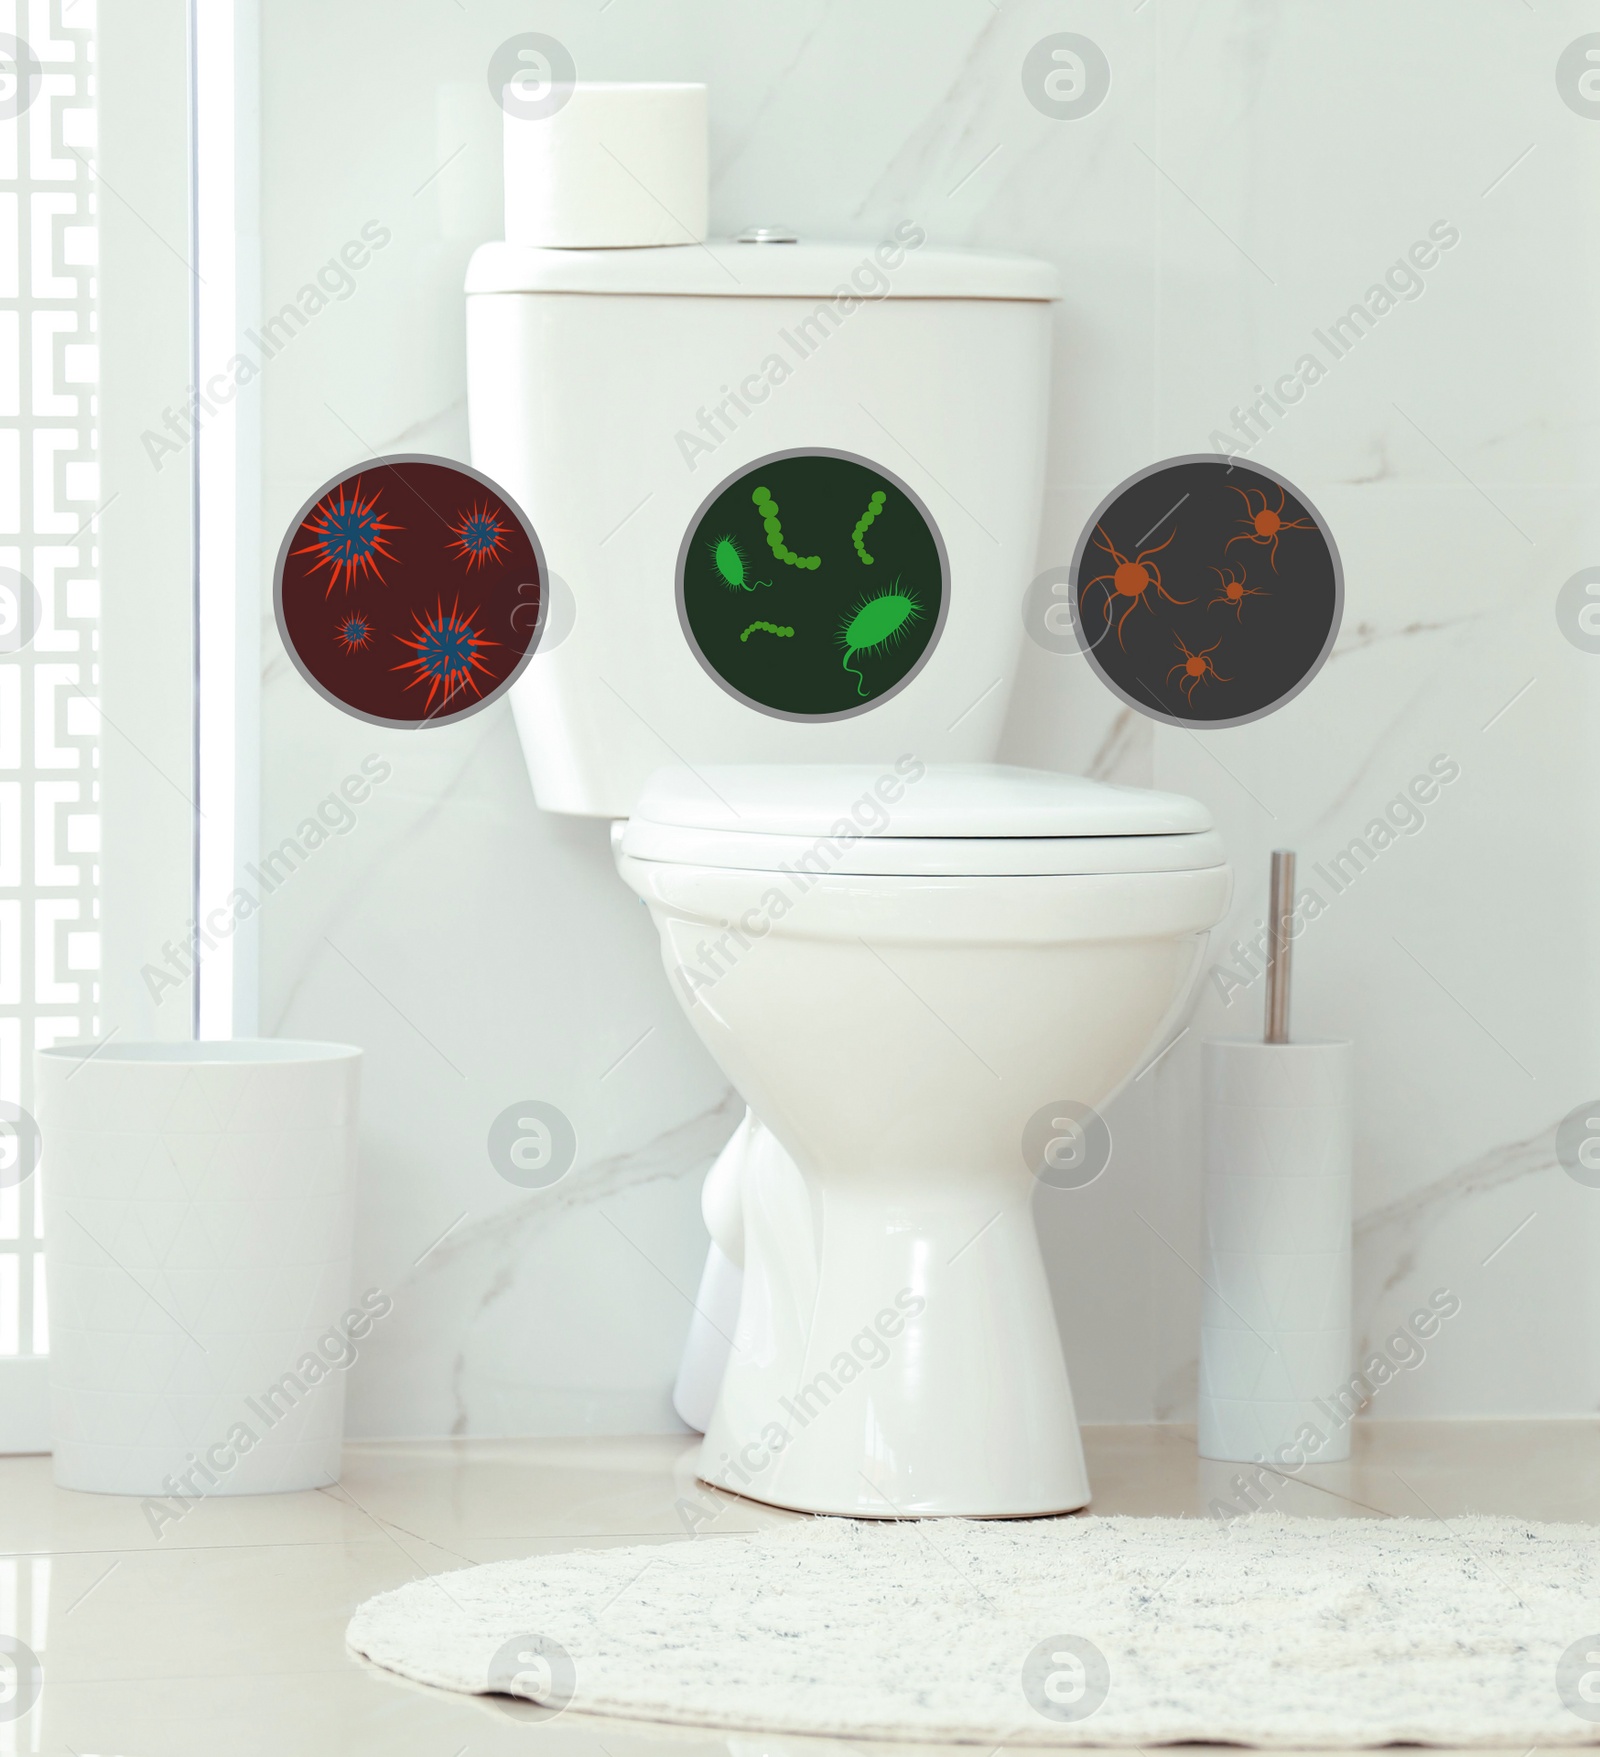 Image of Illustrations of microbes on toilet bowl in bathroom